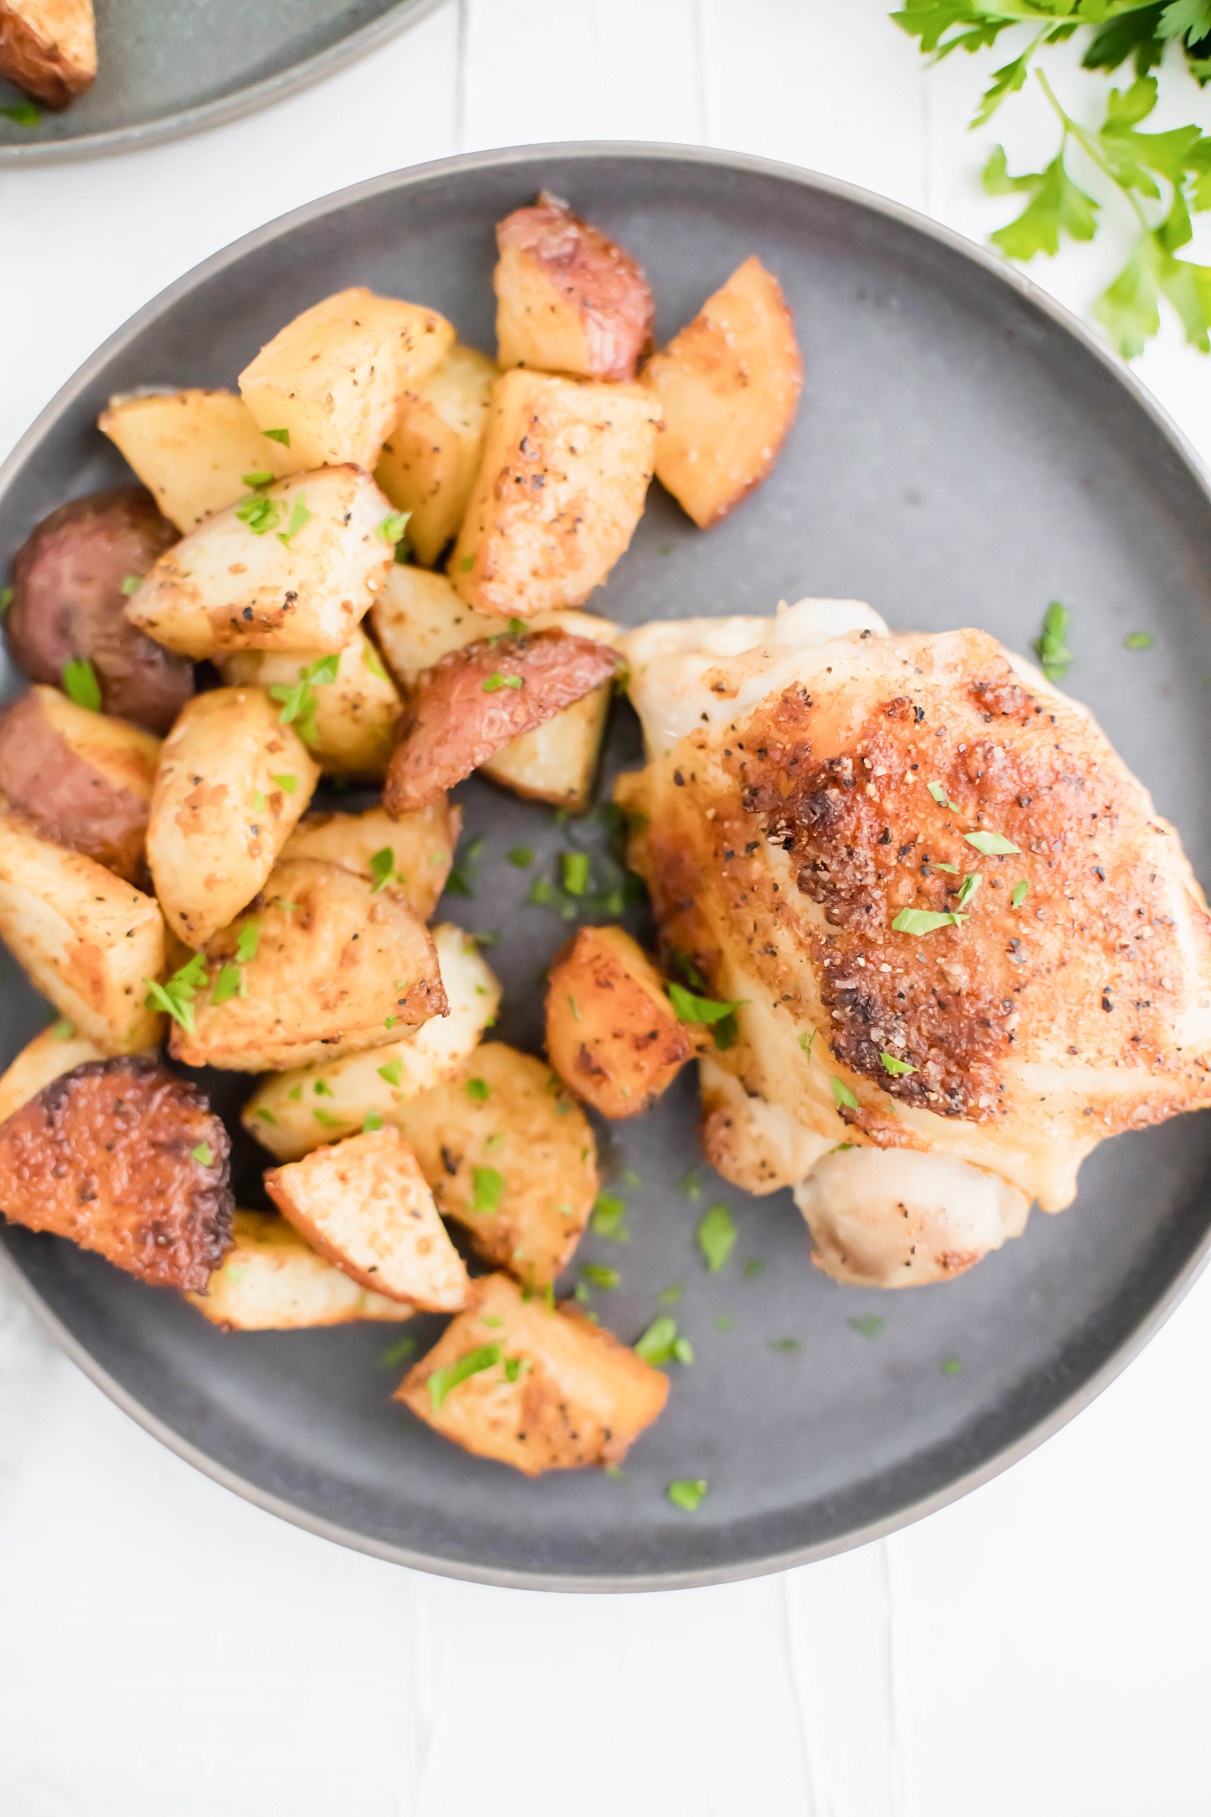 Baked chicken and potatoes on a round gray plate with sprigs of parsley in the upper right corner.